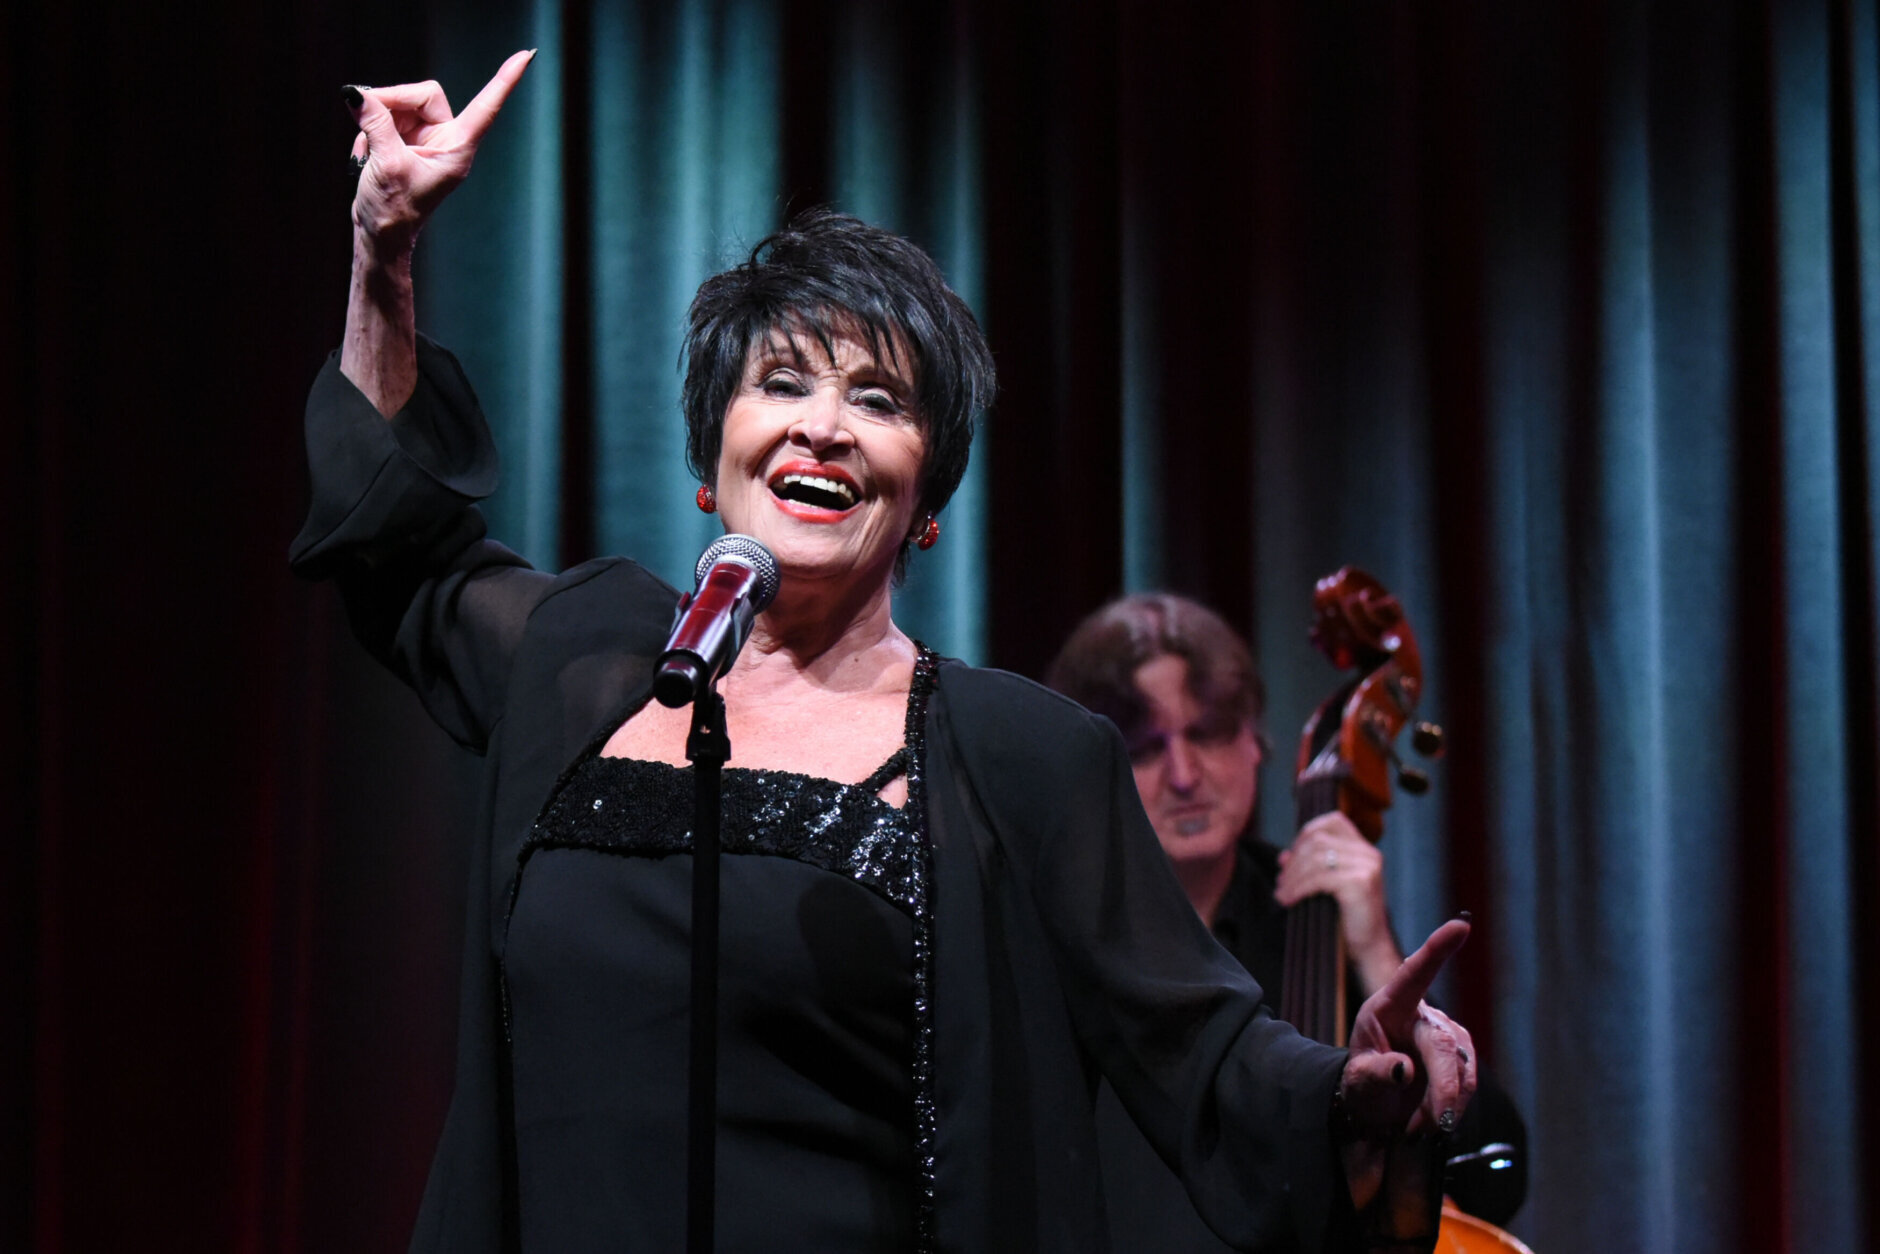 Chita Rivera performs during theChita Rivera: A Lot of Livin to Do segment of the PBS 2015 Summer TCA Tour held at the Beverly Hilton Hotel on Sunday, August 2, 2015 in Beverly Hills, Calif. (Photo by Richard Shotwell/Invision/AP)